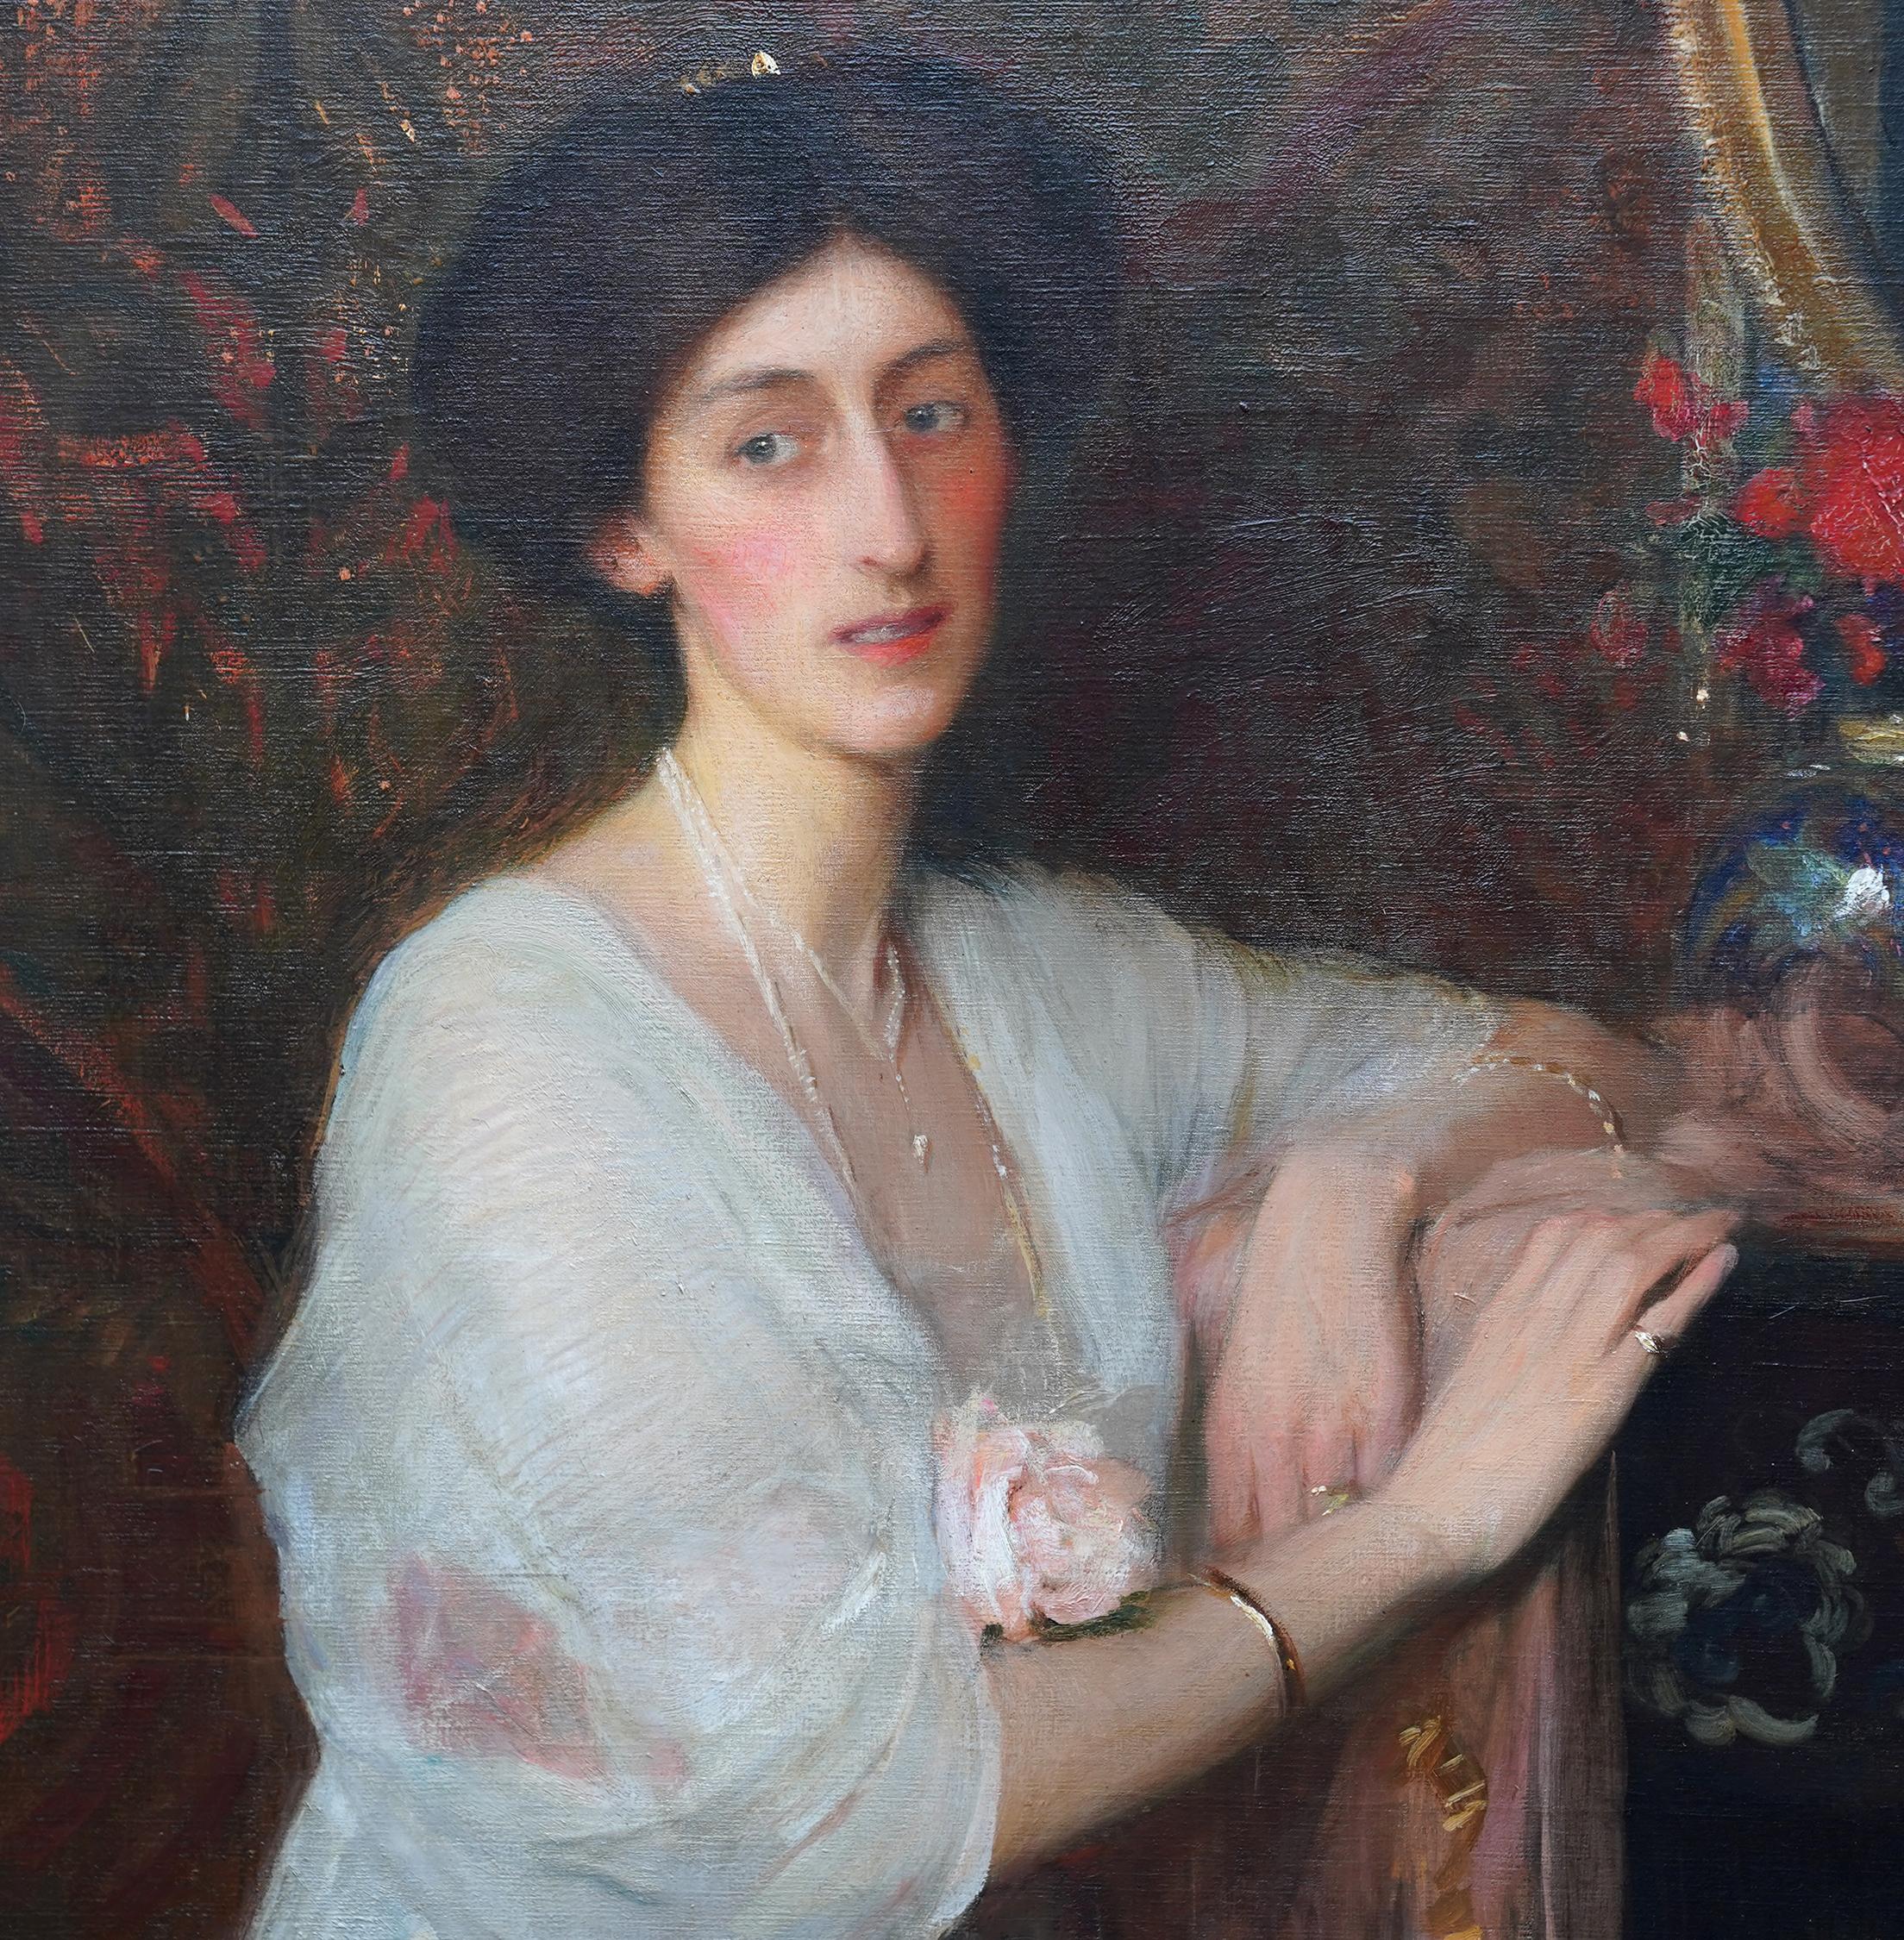 This superb large British Edwardian exhibited portrait oil painting is by noted artist George Spencer Watson. It was painted in 1909 and exhibited at the Royal Academy the same year and has a beautiful Pre-Raphaelite tone to it. One can see the